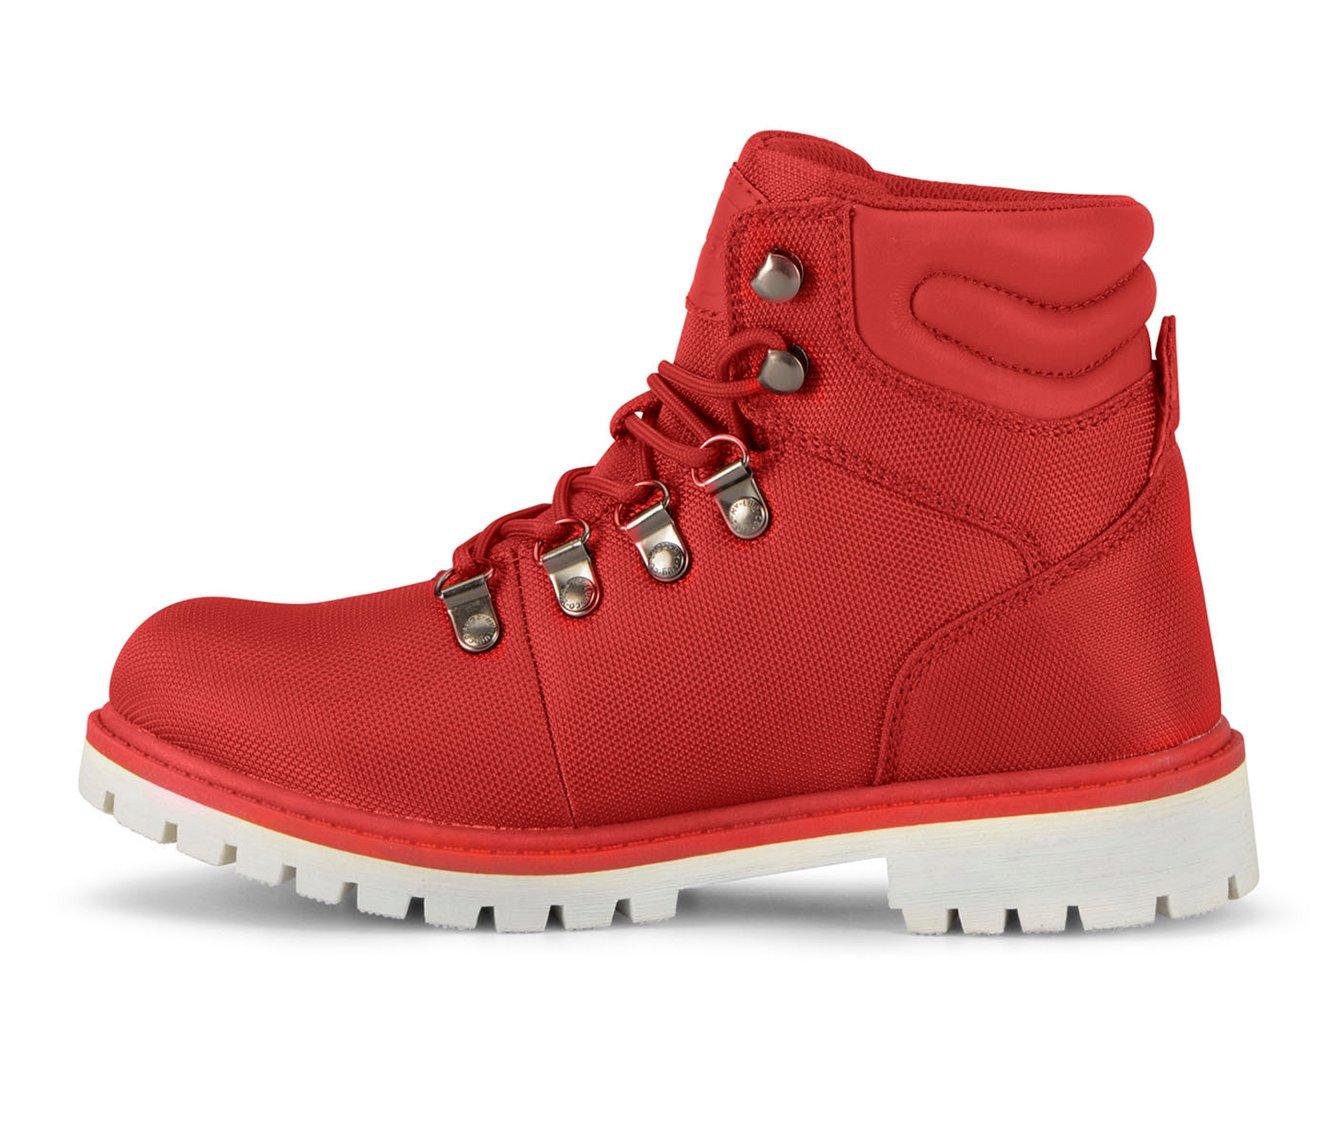 Women's Lugz Grotto II Lace-Up Boots | Shoe Carnival